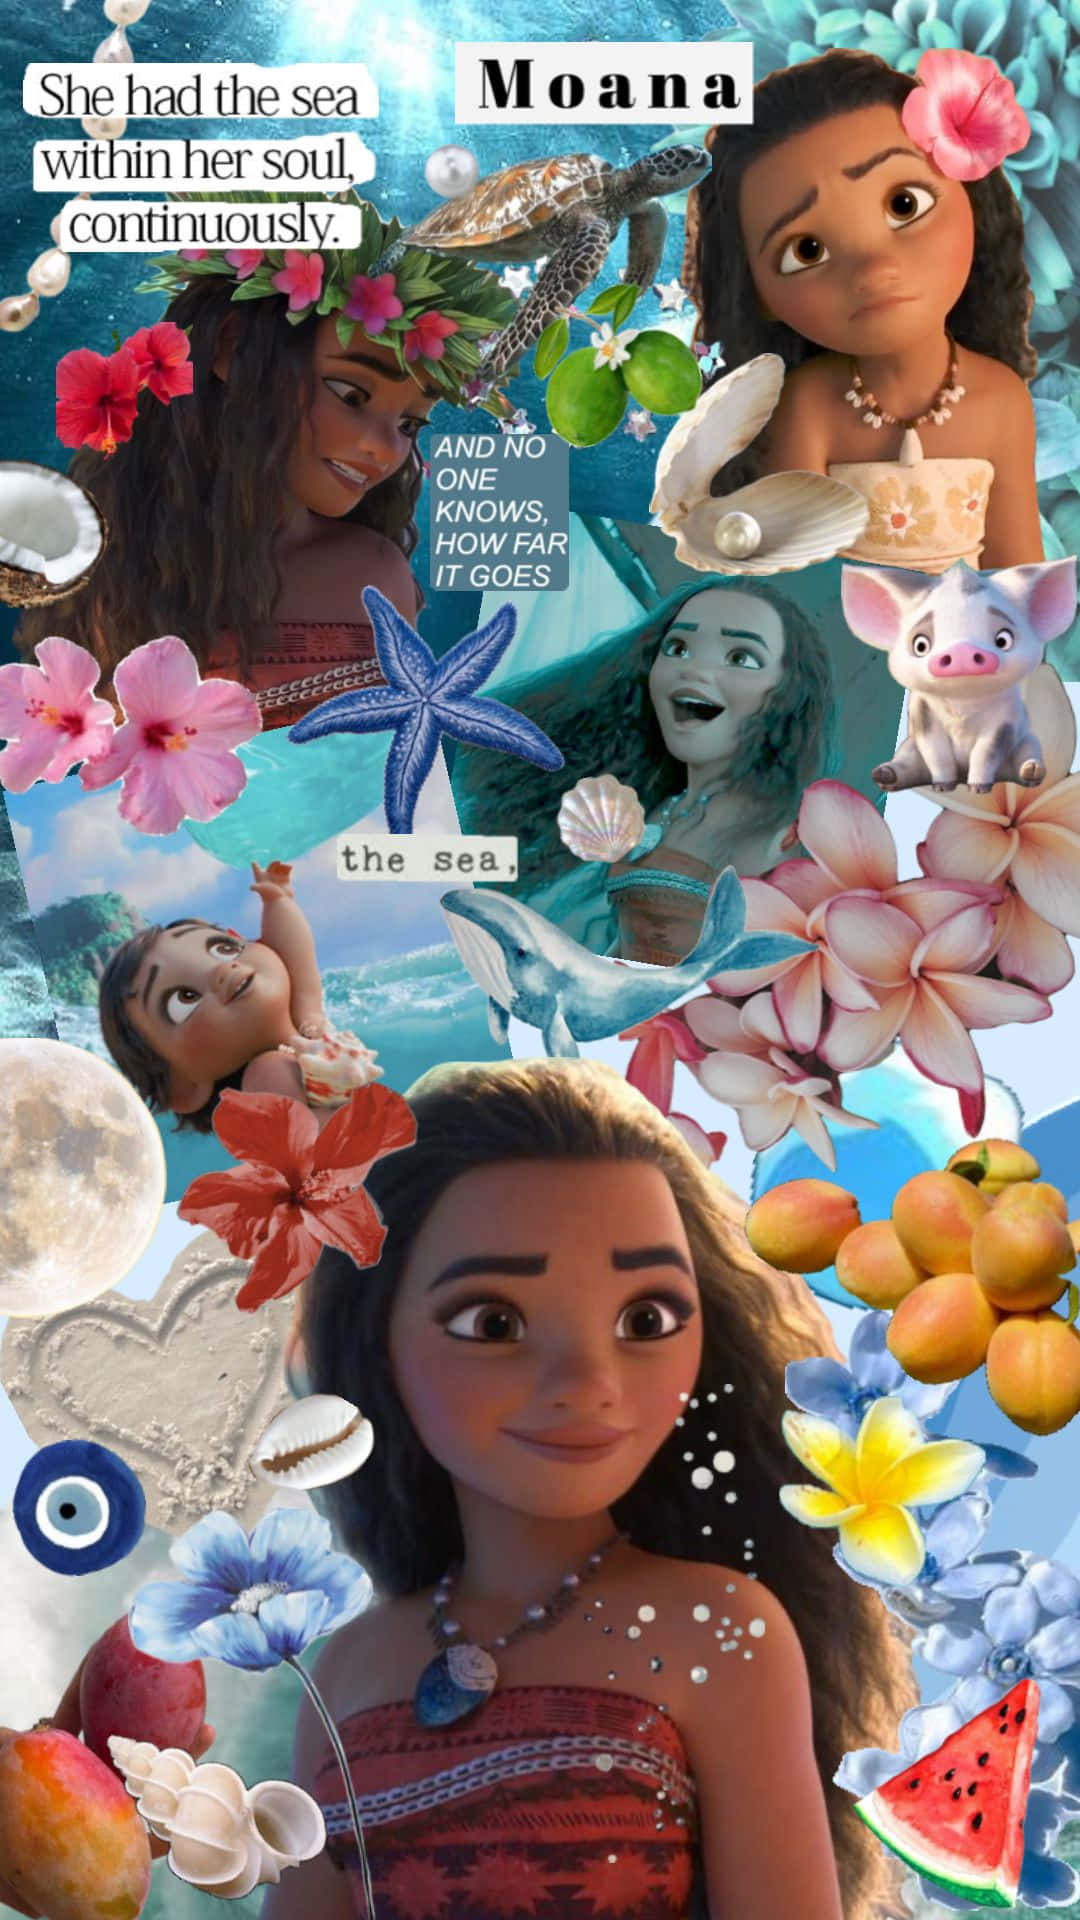 Moana Island Floral Aesthetic Collage Wallpaper